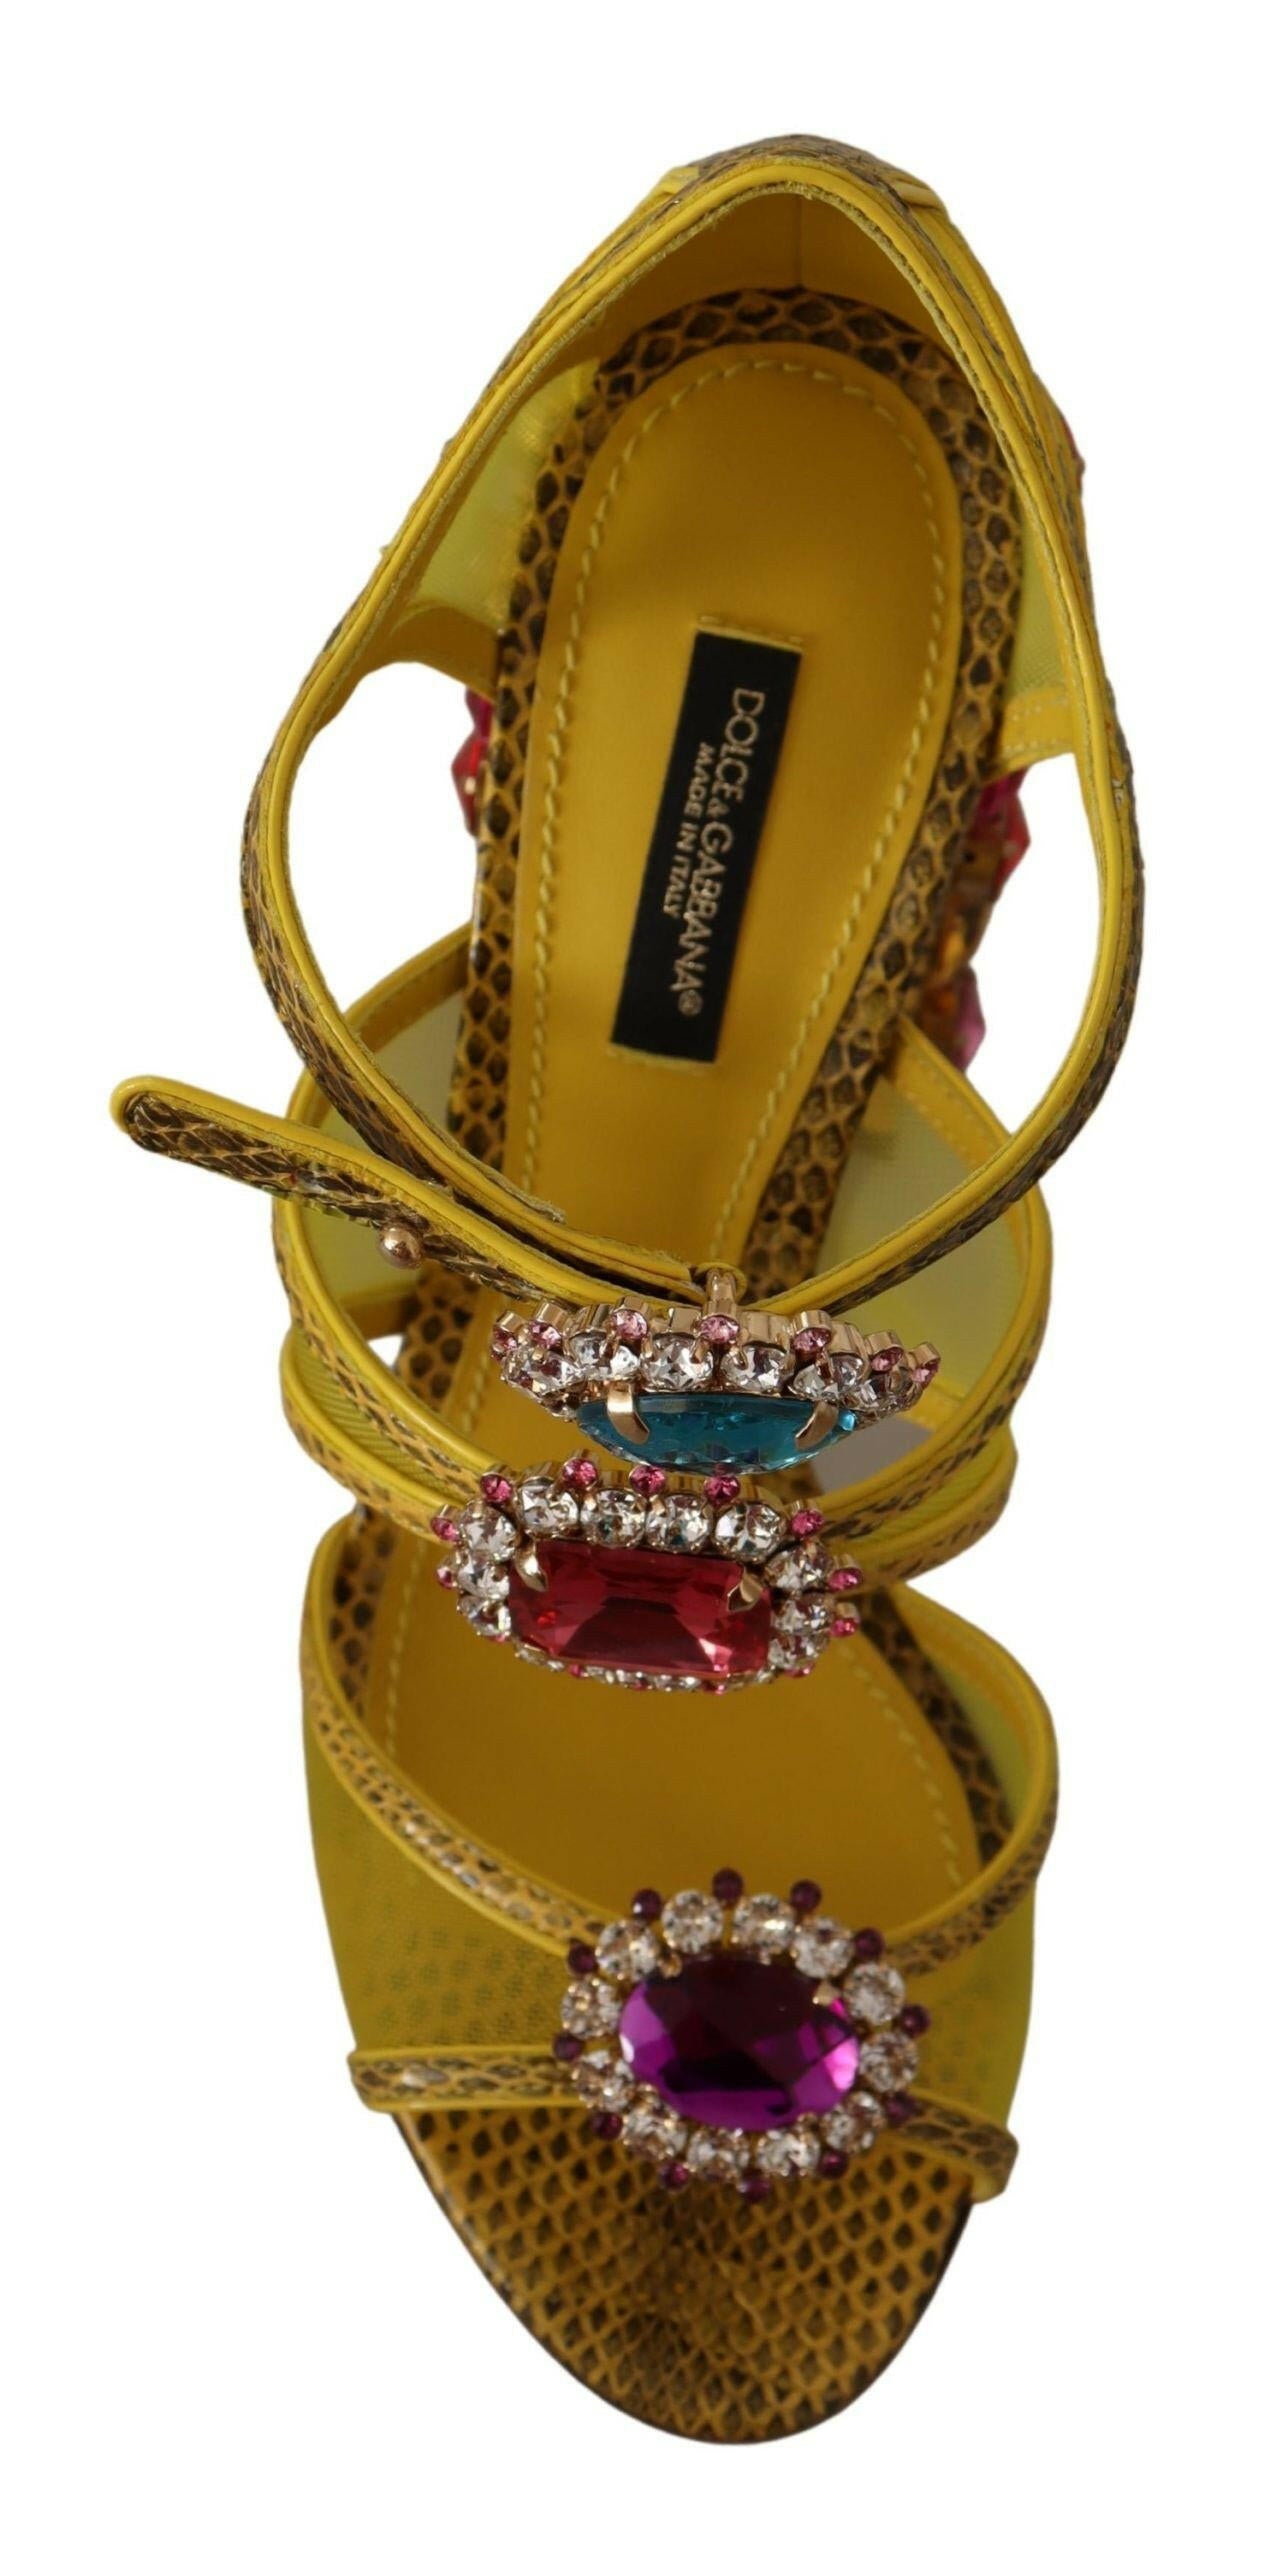 Dolce & Gabbana Yellow Leather Crystal Ayers Sandals Shoes - GENUINE AUTHENTIC BRAND LLC  